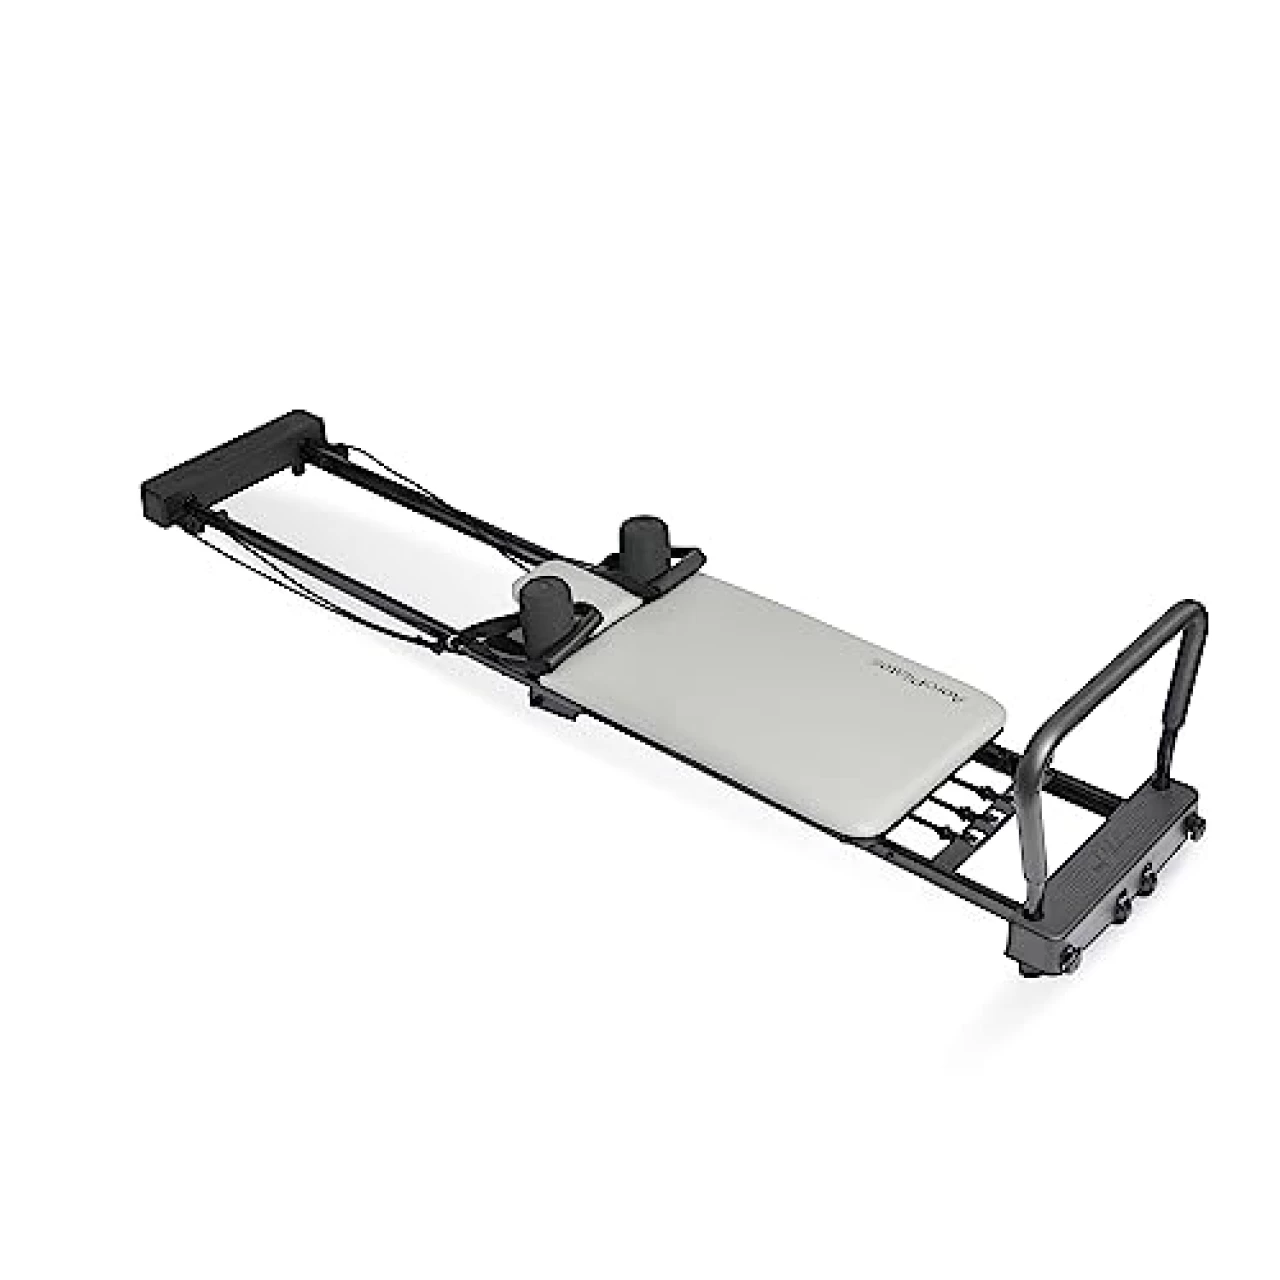 AeroPilates Reformer 287 - Pilates Reformer Workout Machine for Home Gym - Pilates Reformer with 3 Resistance Cords - Up to 300 lbs Weight Capacity